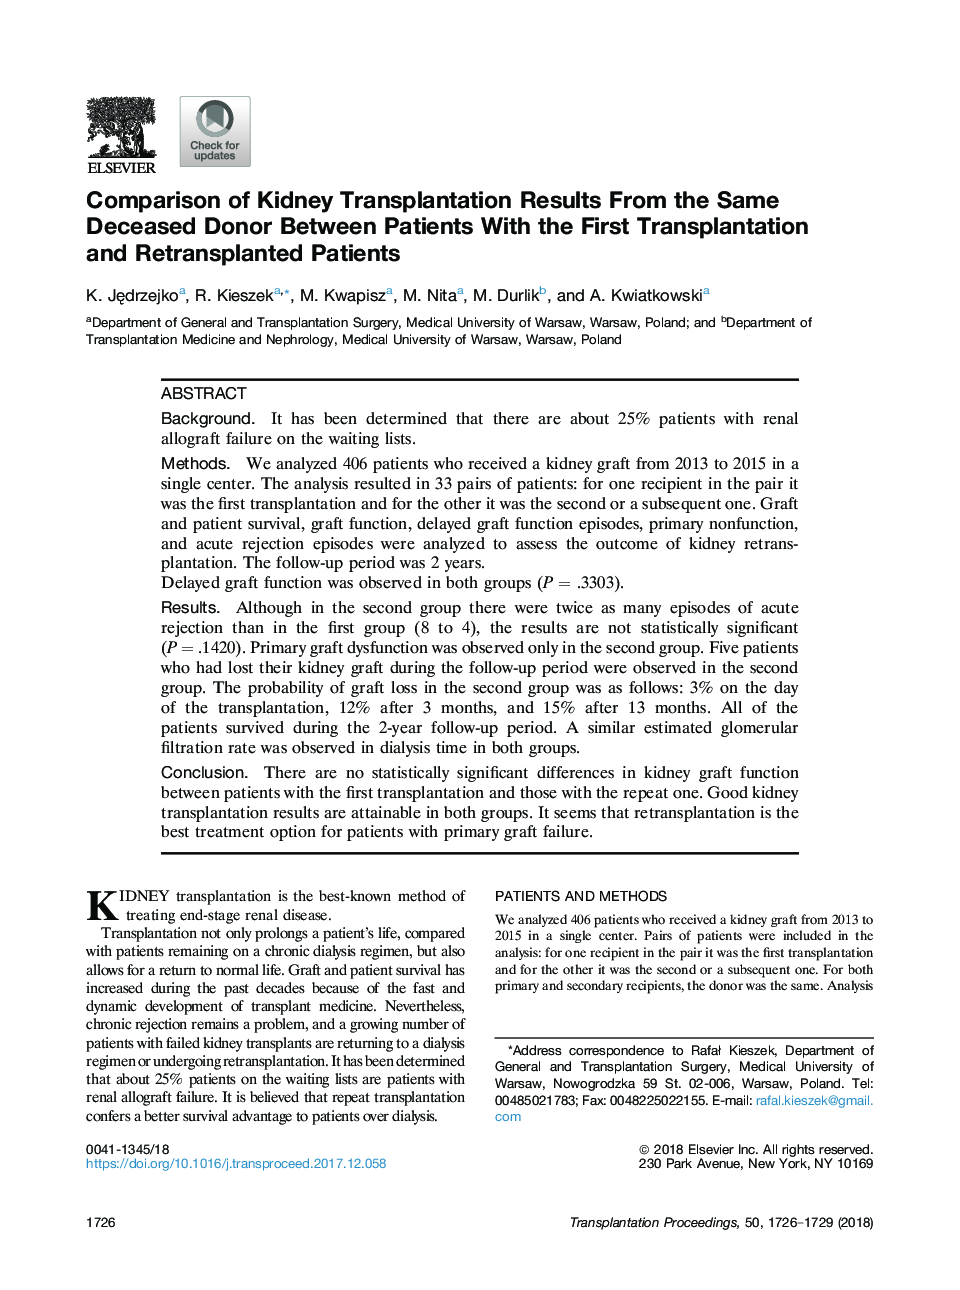 Comparison of Kidney Transplantation Results From the Same Deceased Donor Between Patients With the First Transplantation and Retransplanted Patients